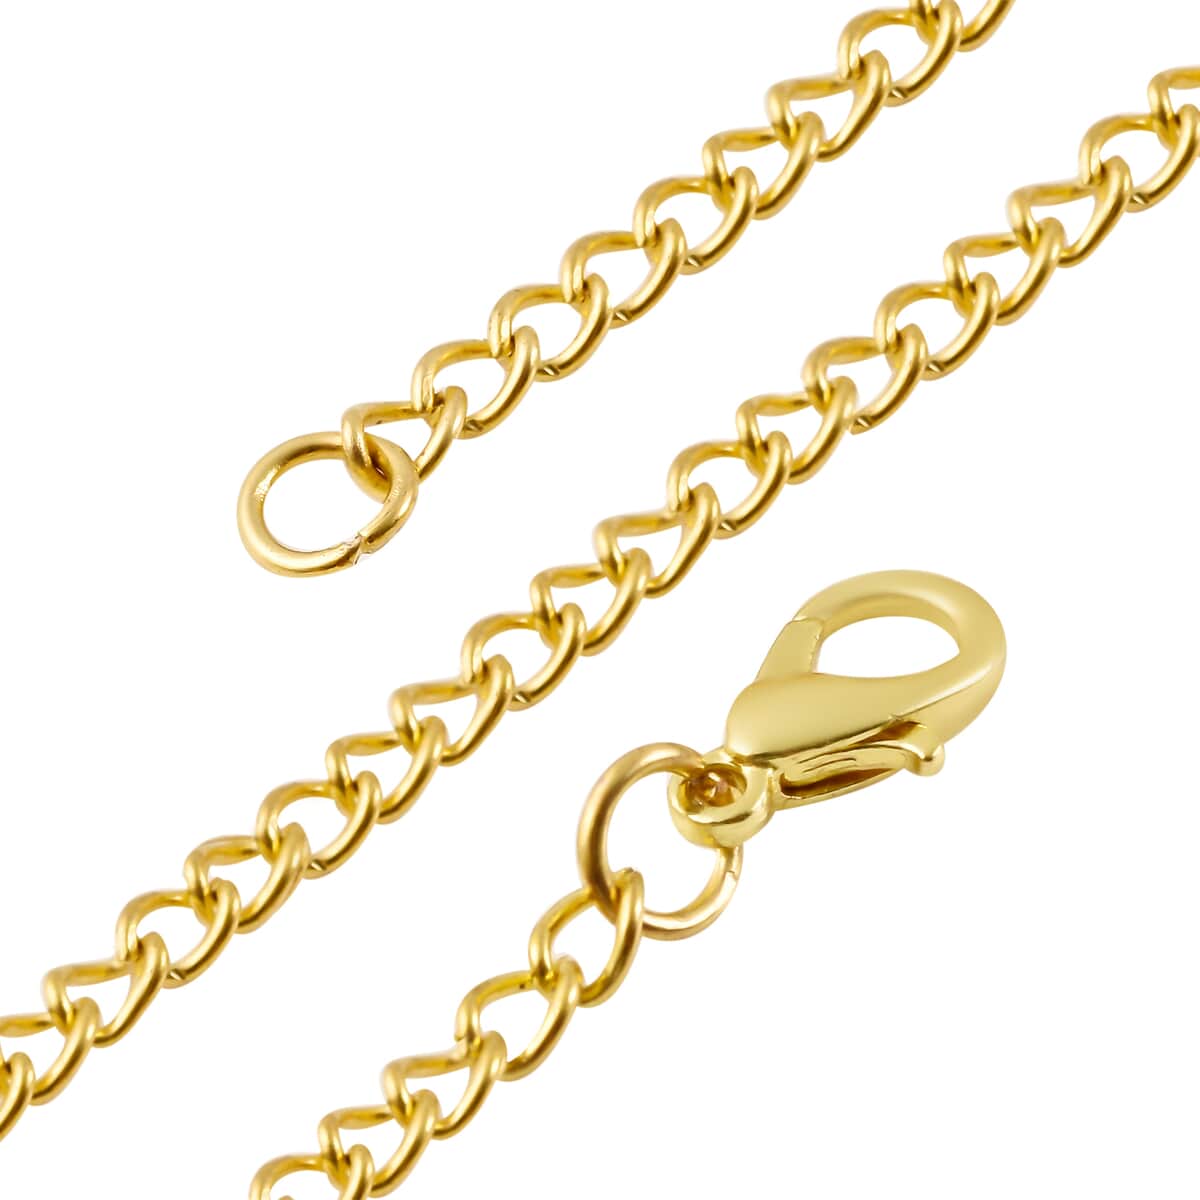 Strada Japanese Movement Border Collie Pocket Watch in Goldtone with Chain (31 Inches) image number 6